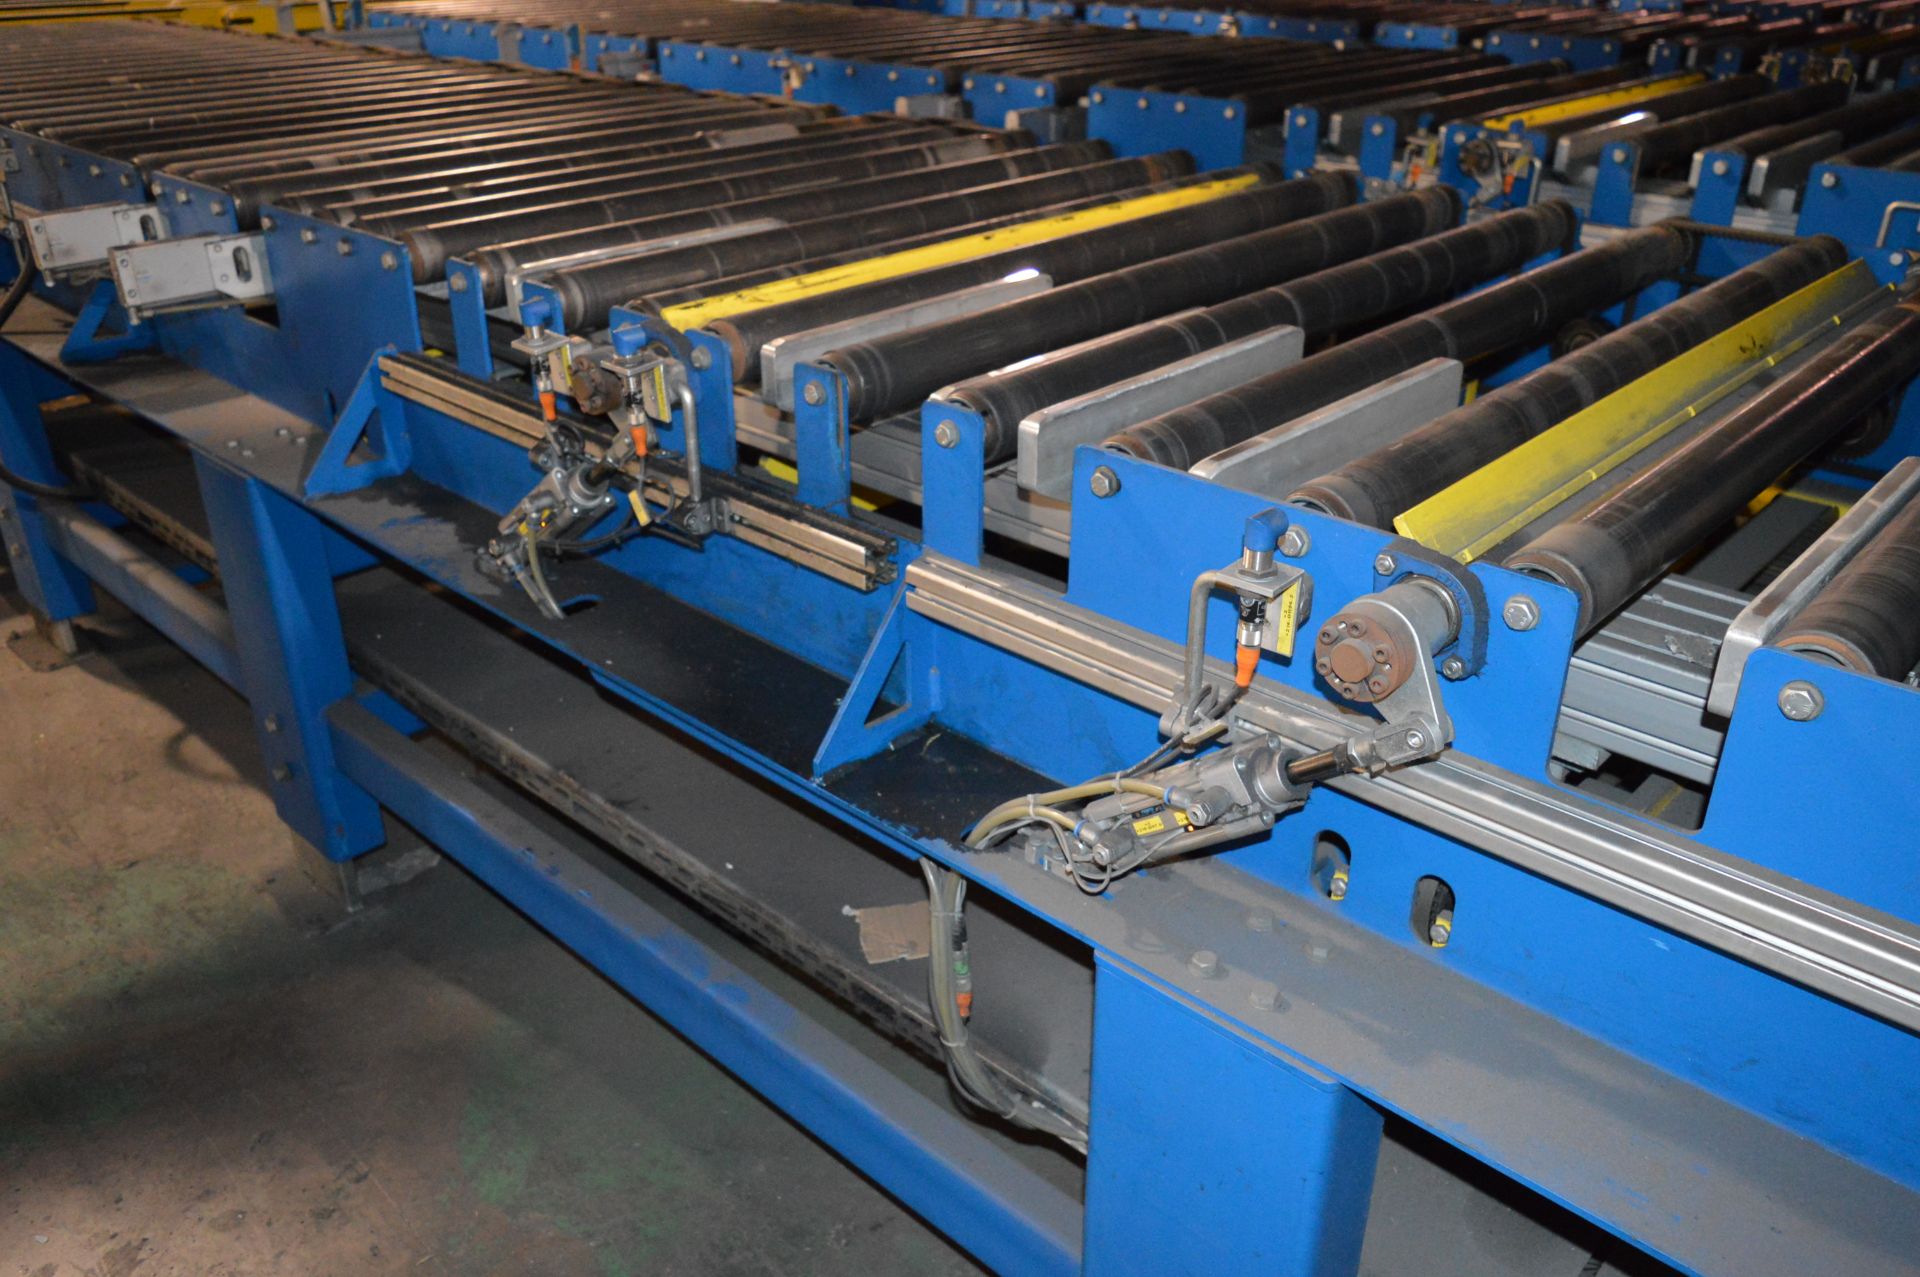 2 x Kraft, motorised roller conveyors (2006) Each 3.8m (l) x 1.14m (w) (Due to the complexity of